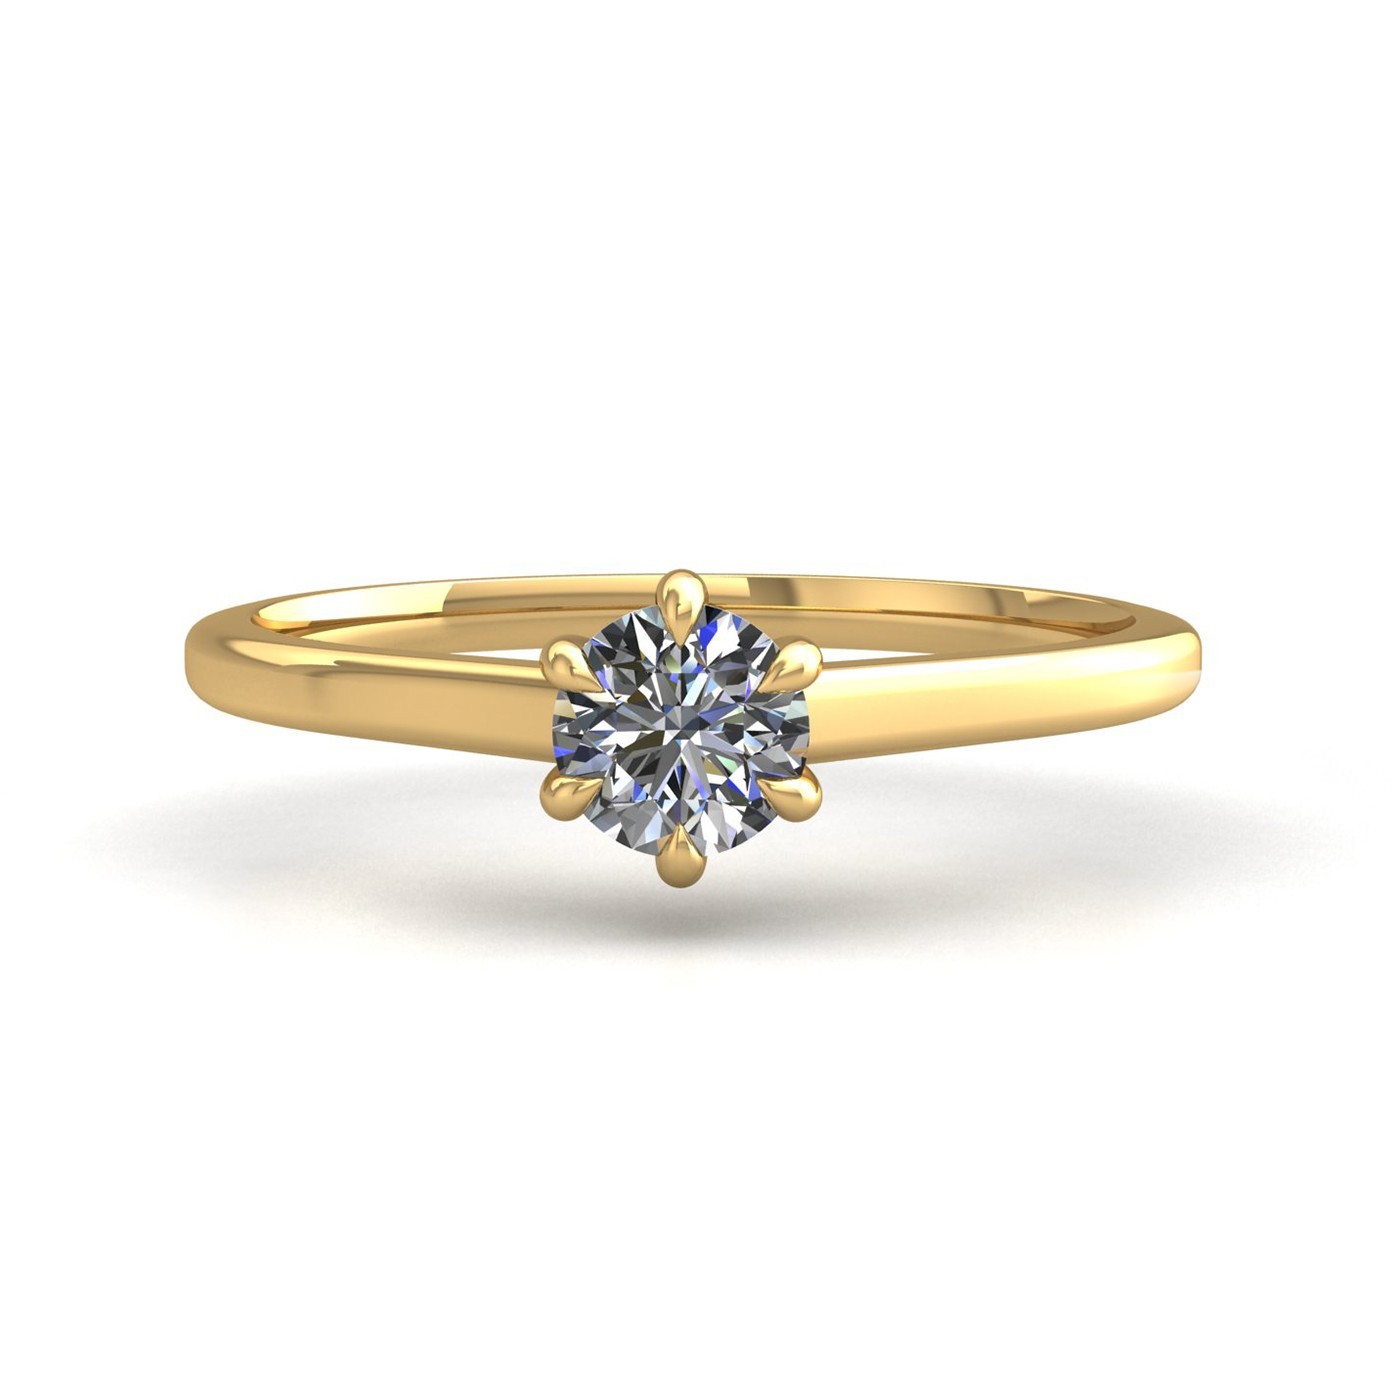 18k yellow gold 1,50 ct 6 prongs solitaire round cut diamond engagement ring with whisper thin band Photos & images